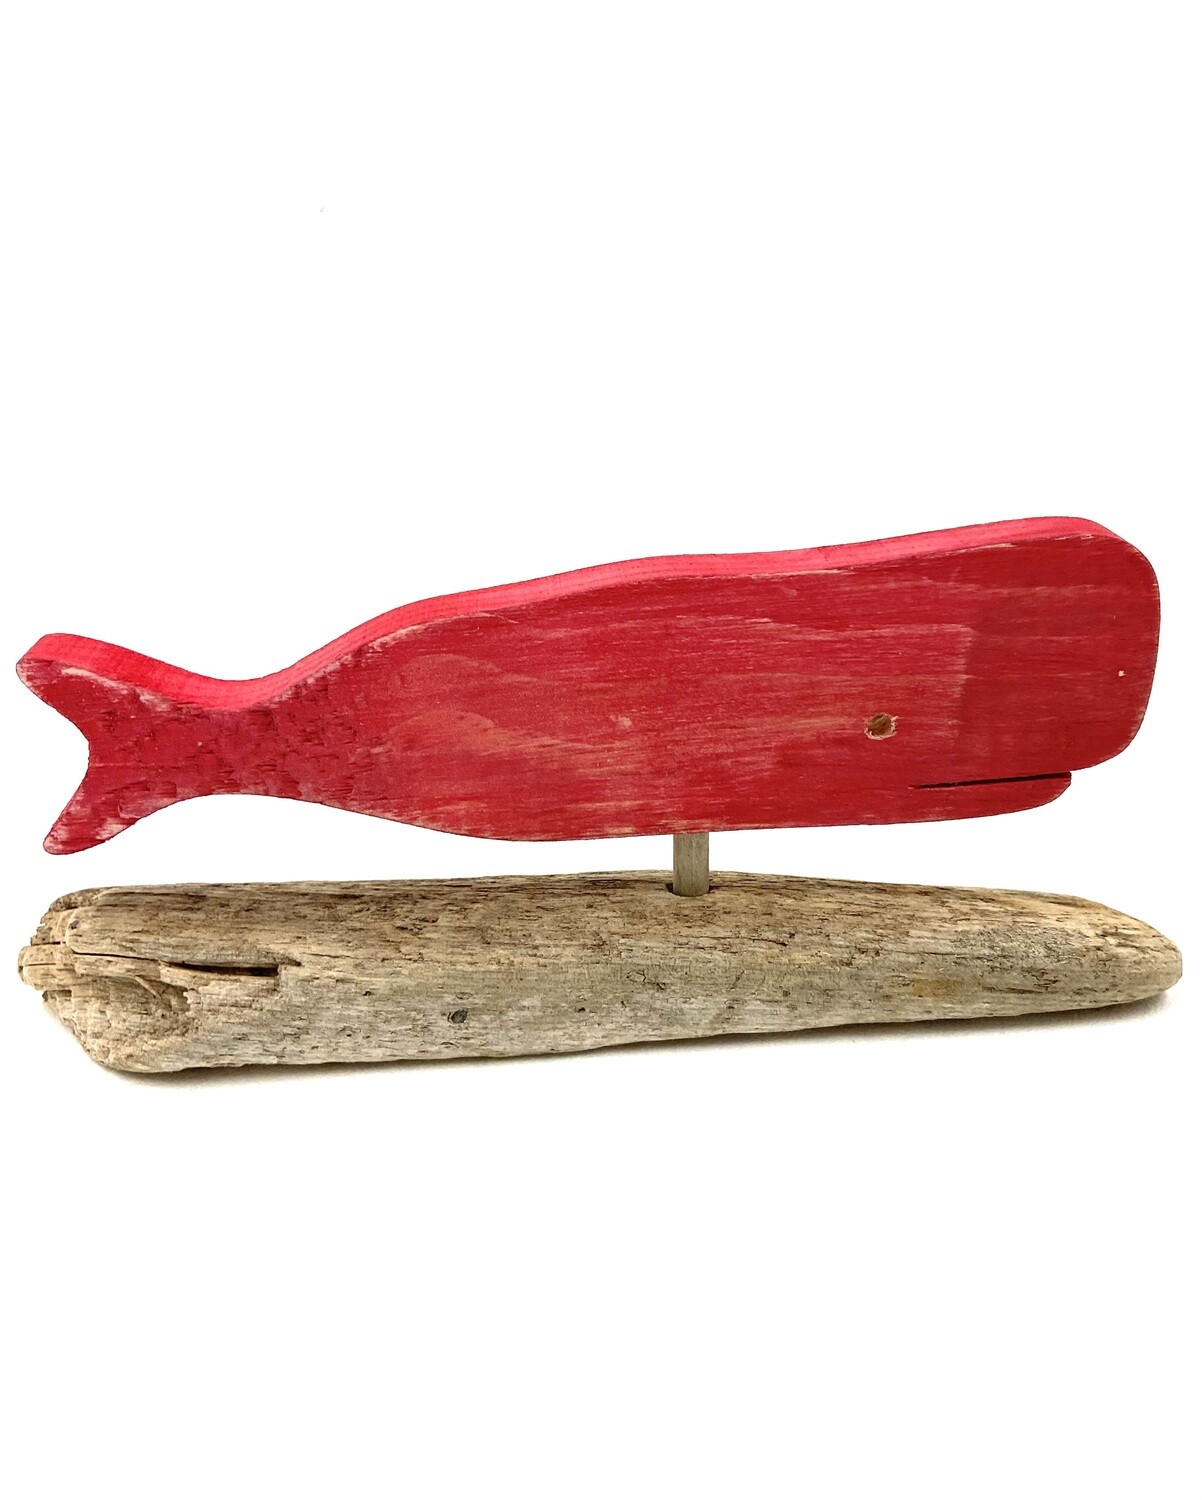 Red Whale on Driftwood- Jerry Walsh